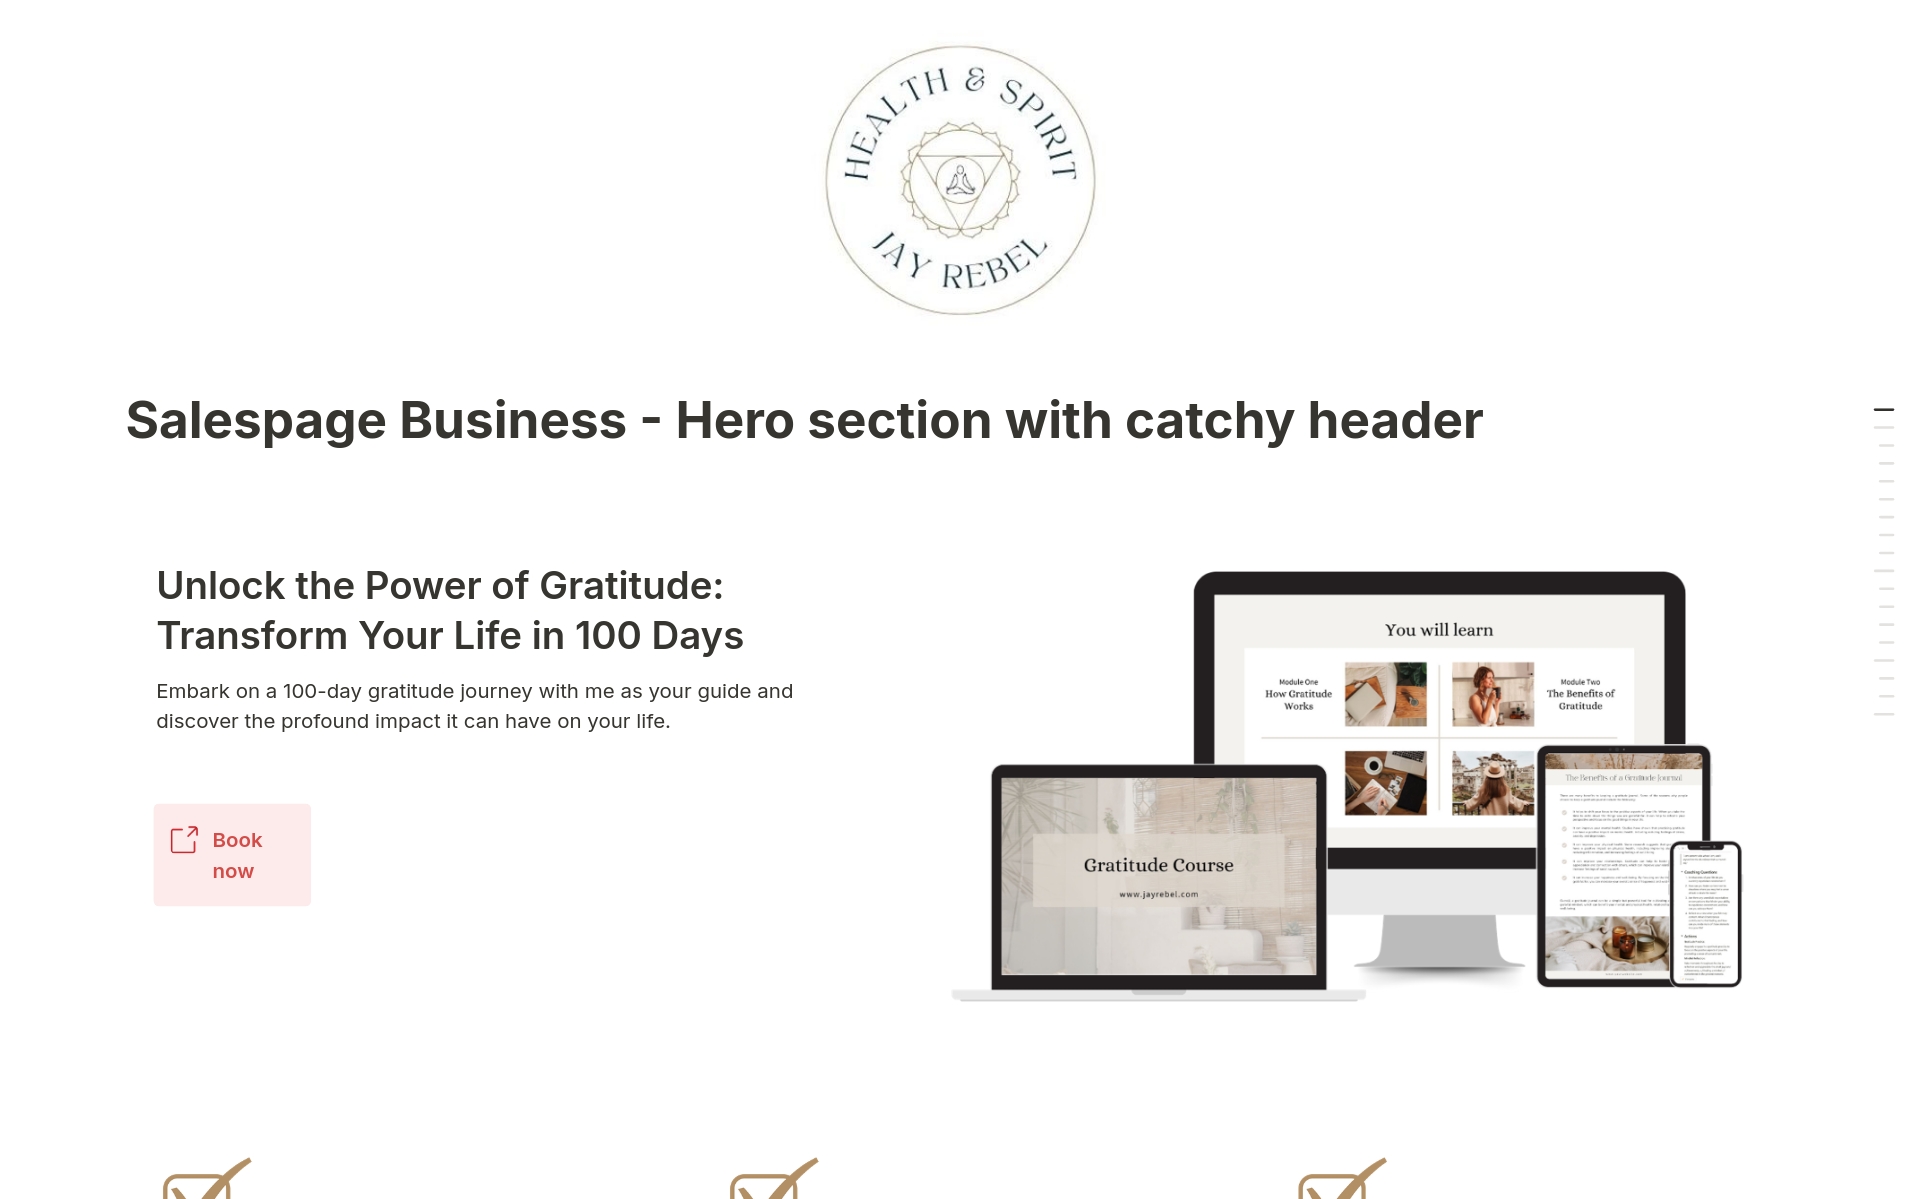 Sell More with Less Effort: Build Powerful Sales Pages Directly in Notion

Ditch your expensive tools and unlock the power of Notion for creating high-converting sales pages.

Design professional sales pages in minutes with this drag-and-drop Notion template.

No coding required.